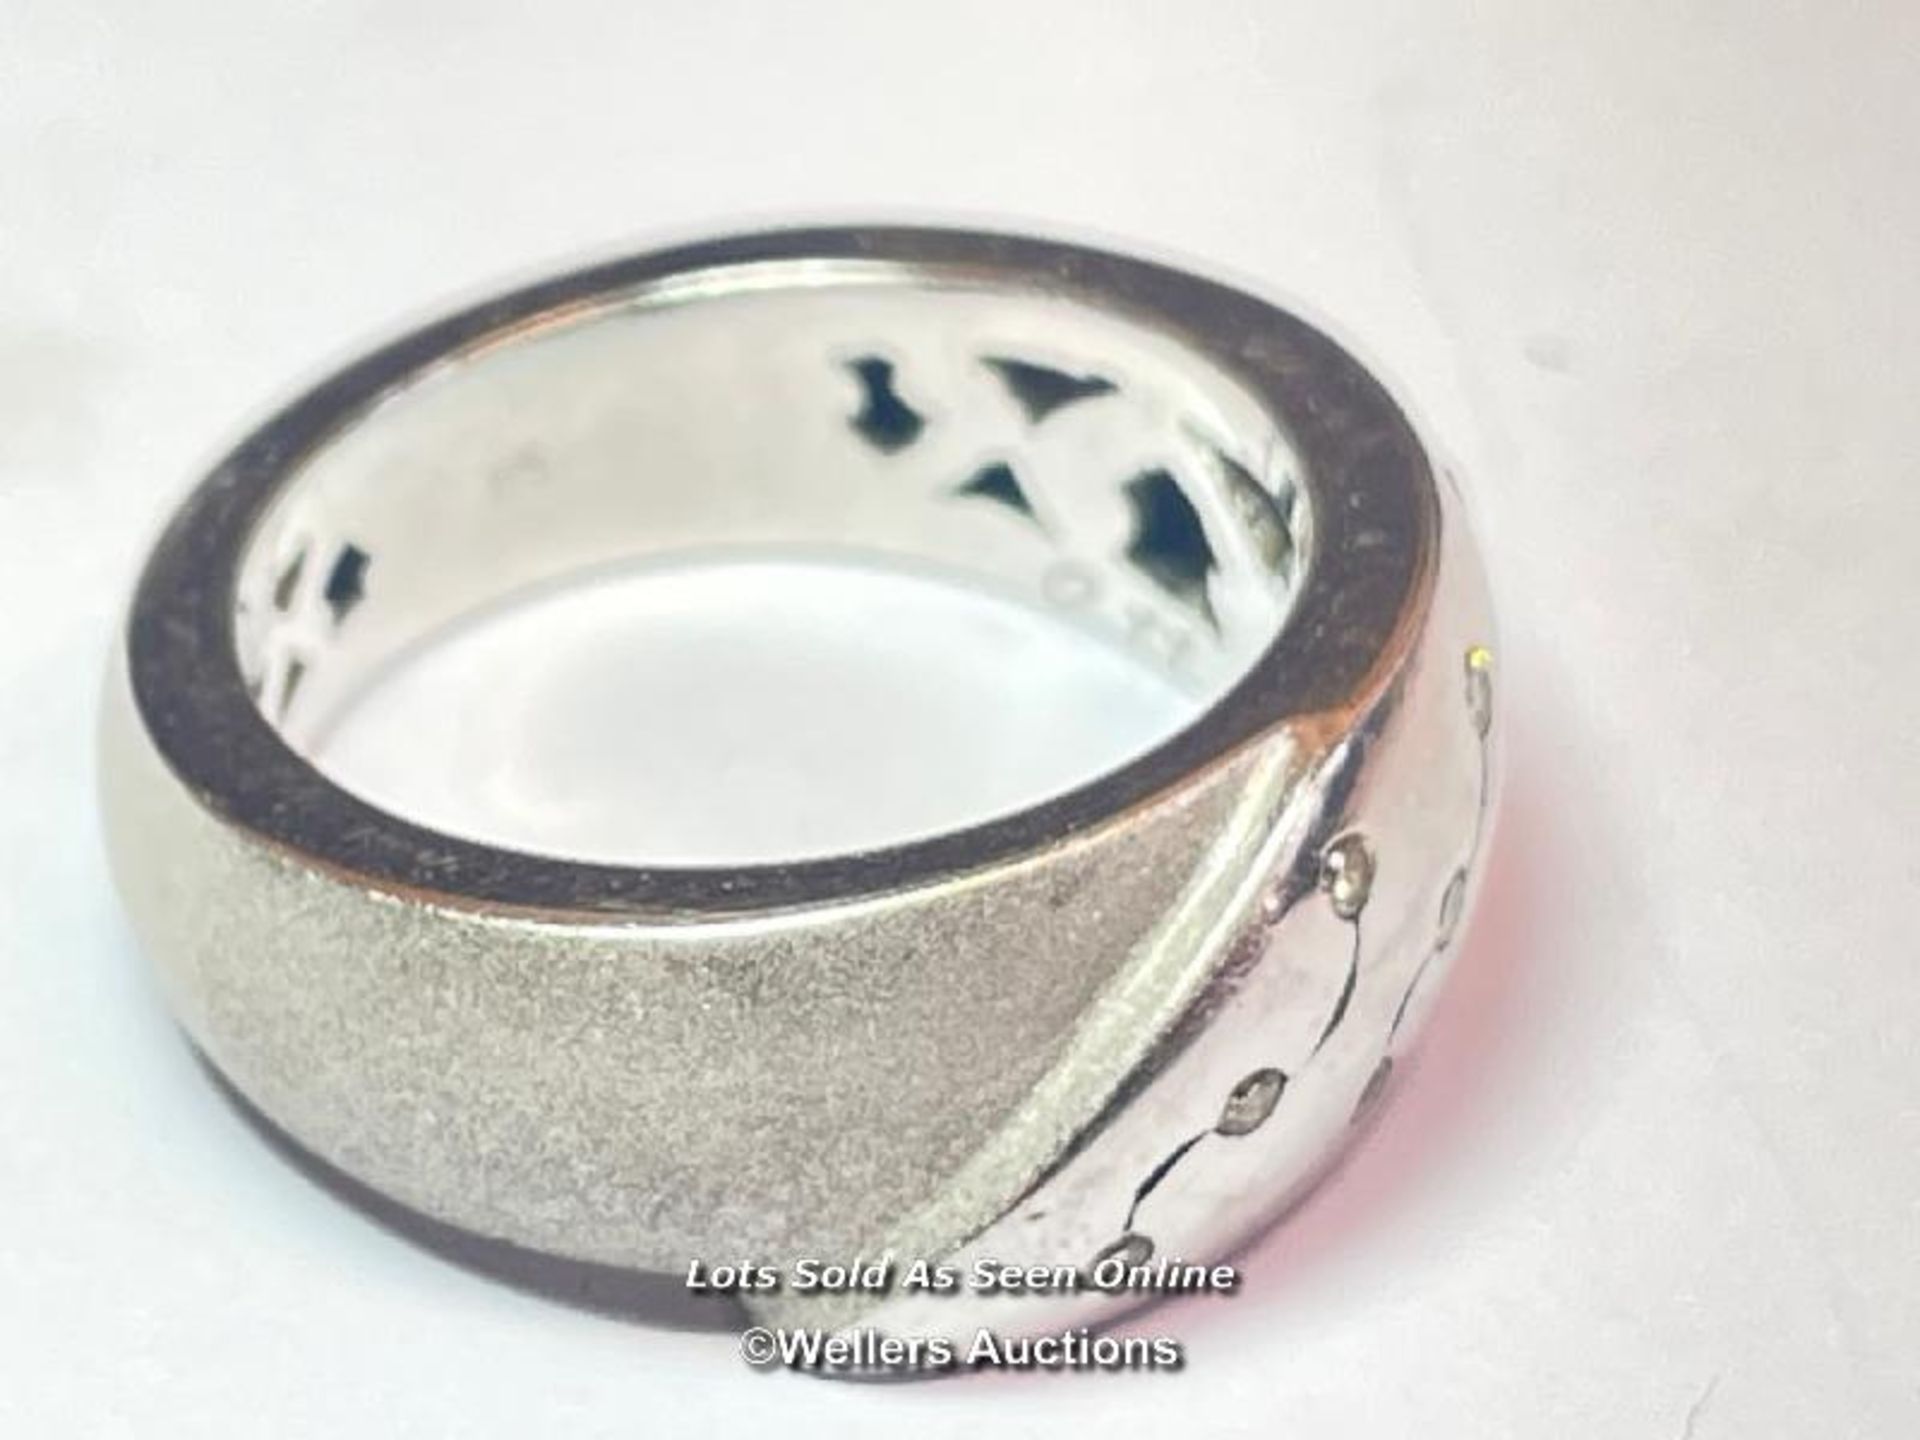 WHITE GOLD RING SET WITH NINE DIAMOND ACCENTS, PART POLISHED PART MATT FINISHED, STAMPED 750, RING - Image 2 of 7